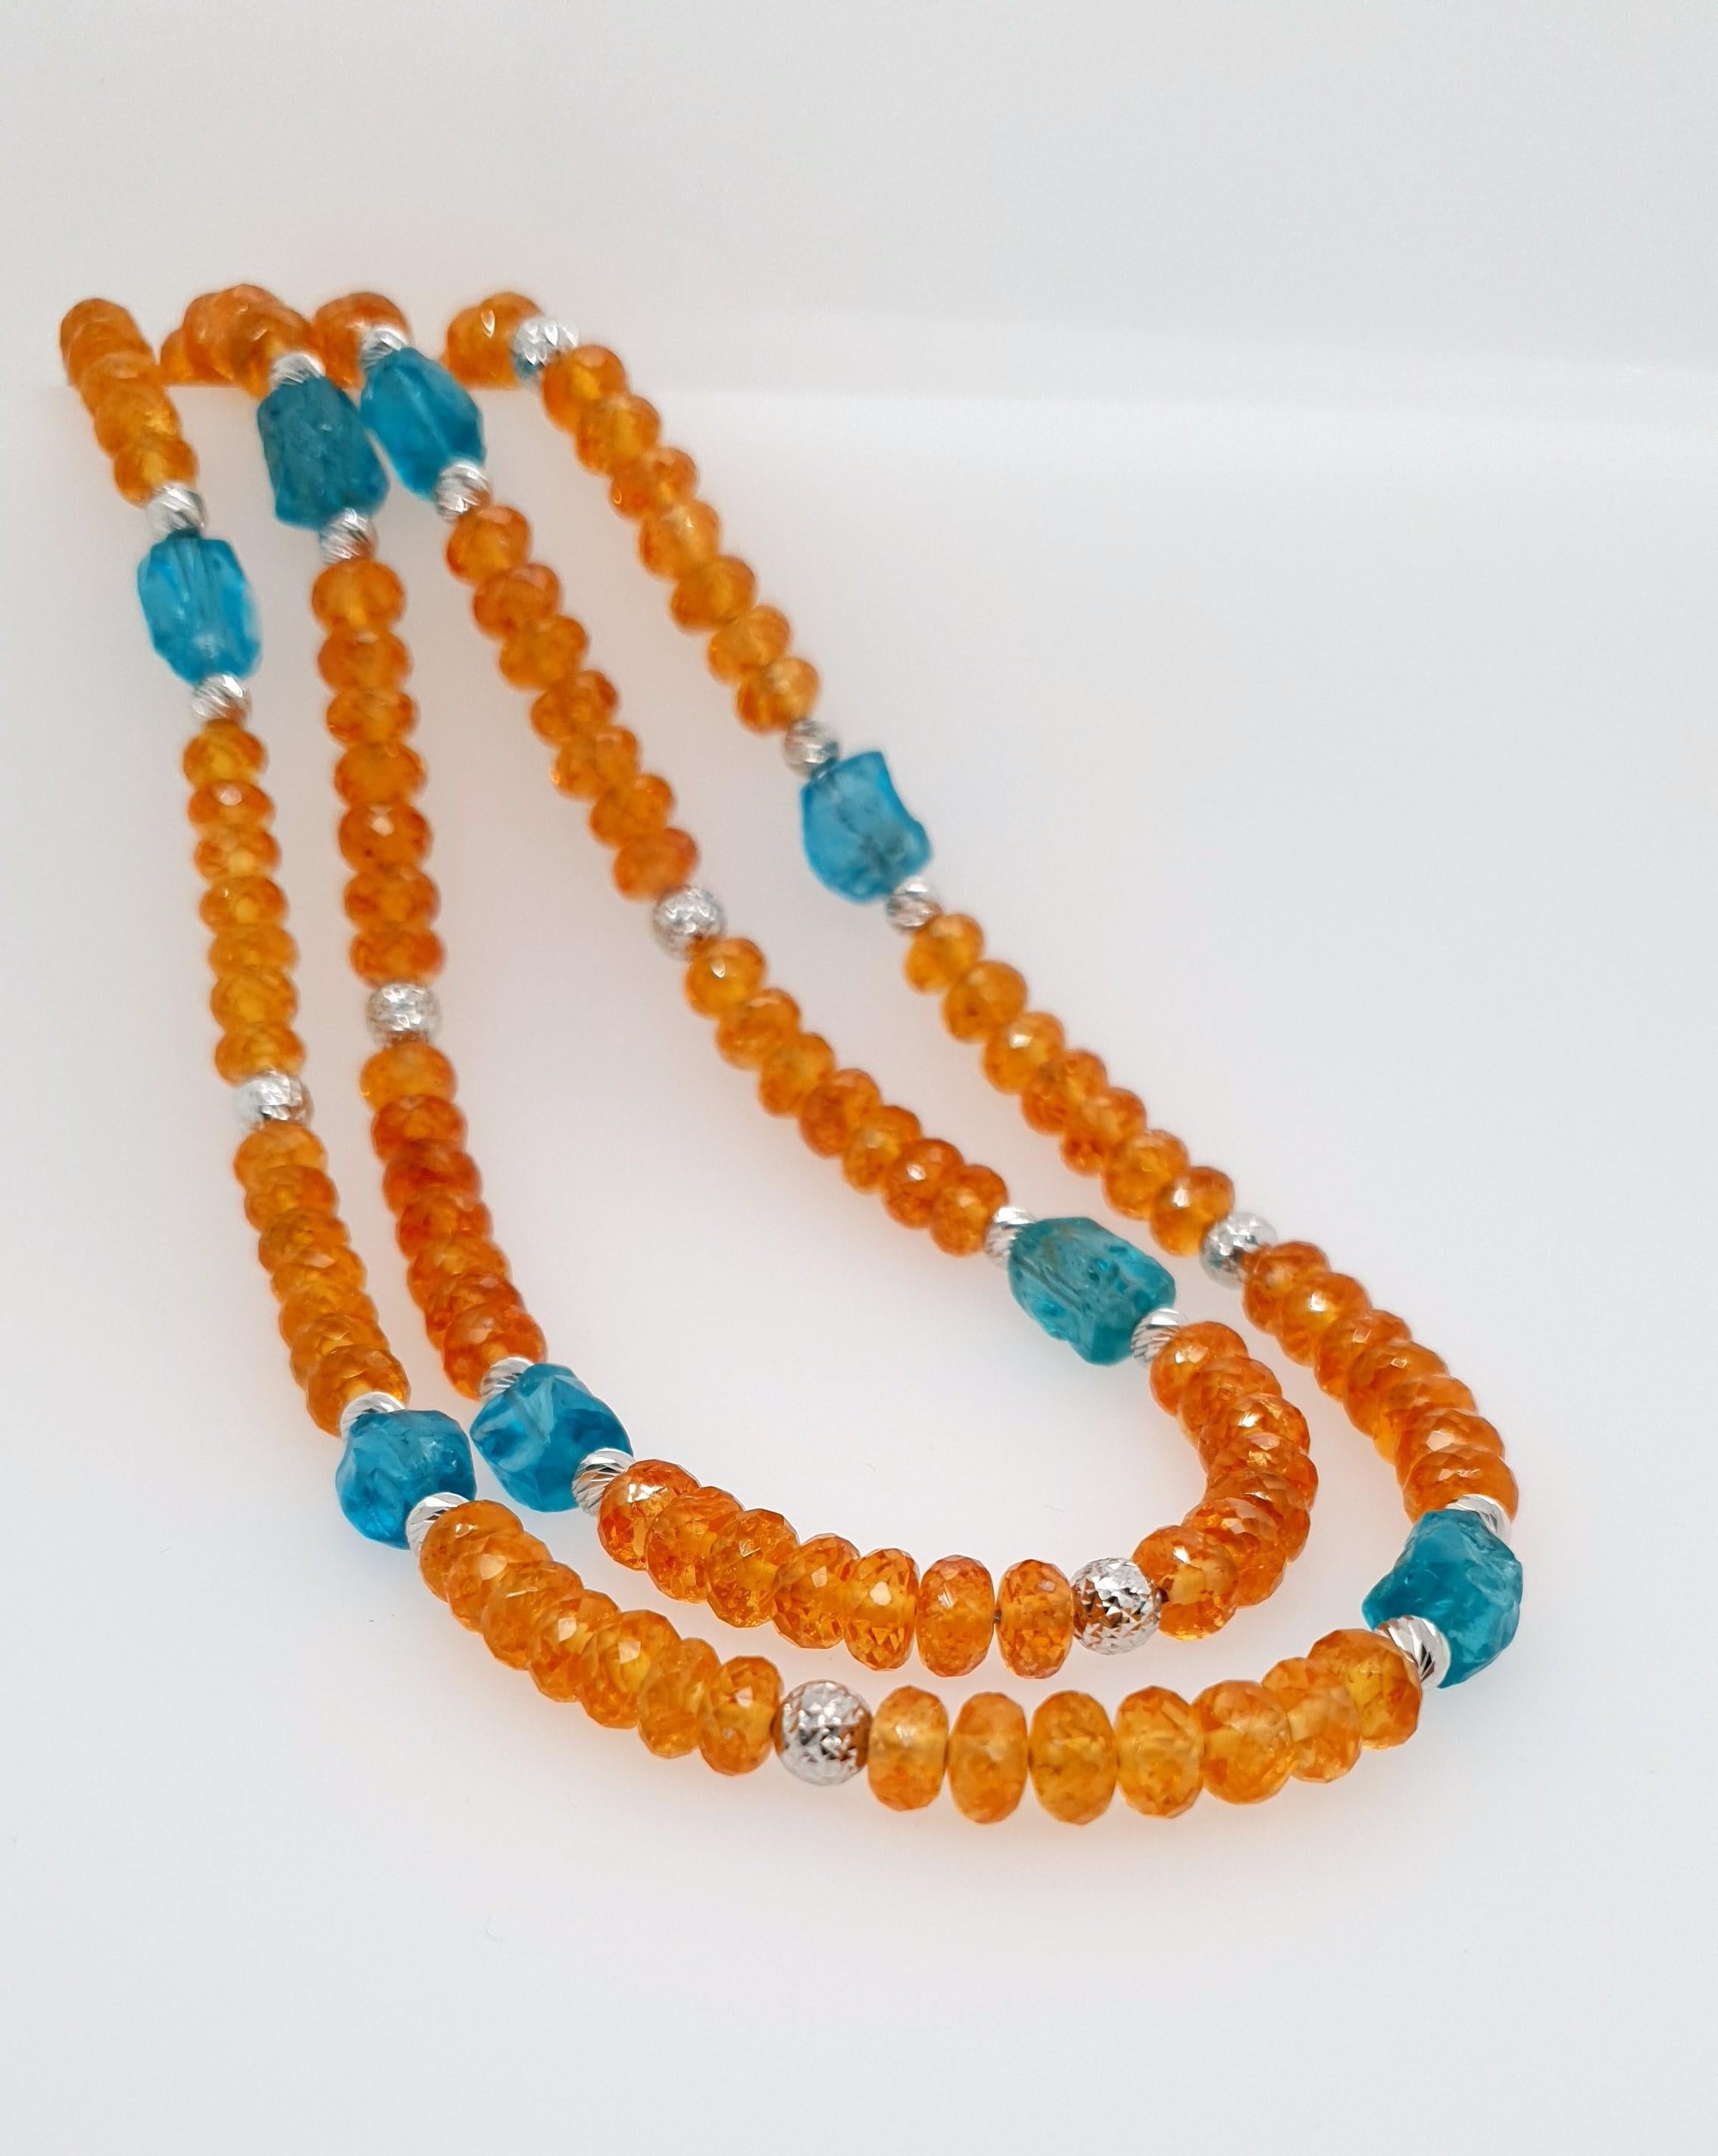 Orange Garnets and Paraiba Color Apatite Beads Necklace with 18 Carat White Gold 10